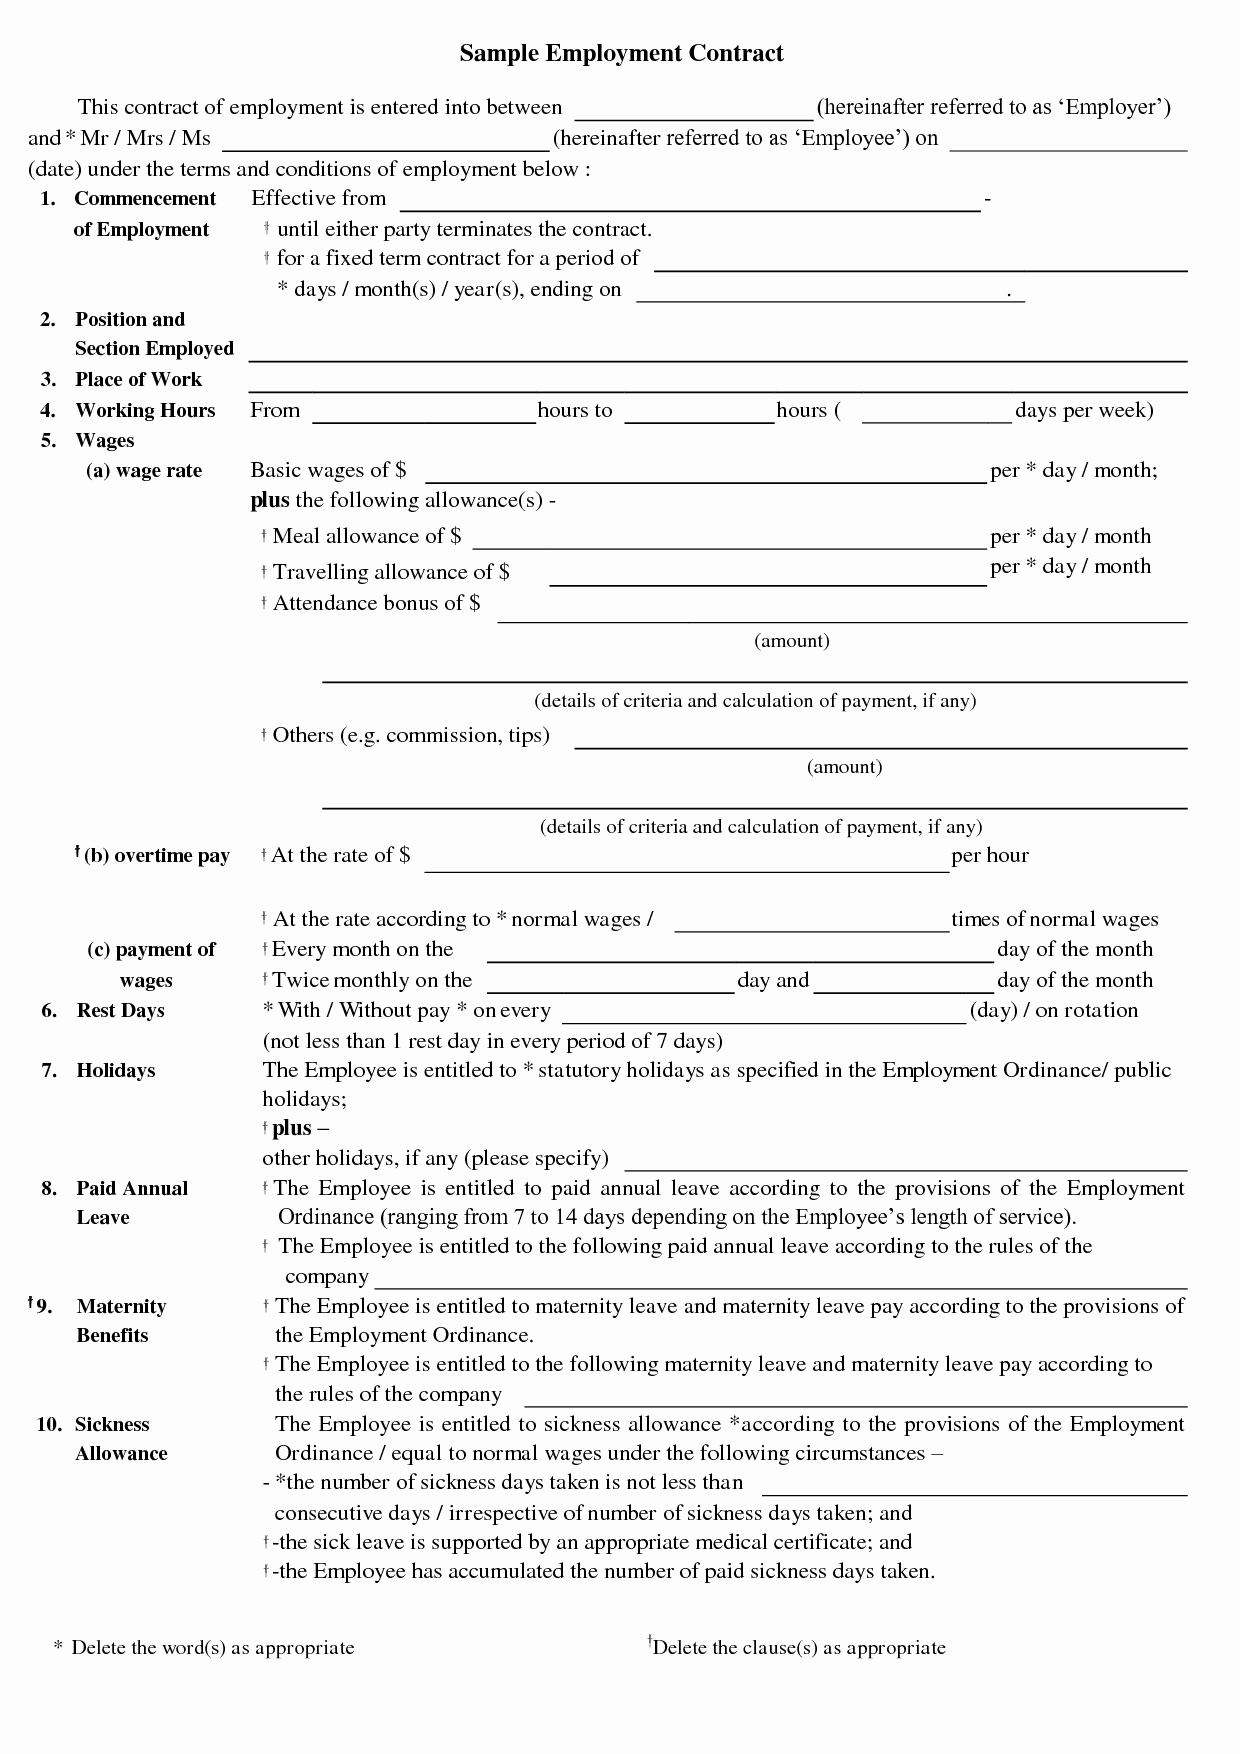 Free Employment Contract Templates New Free Printable Employment Contract Sample form Generic